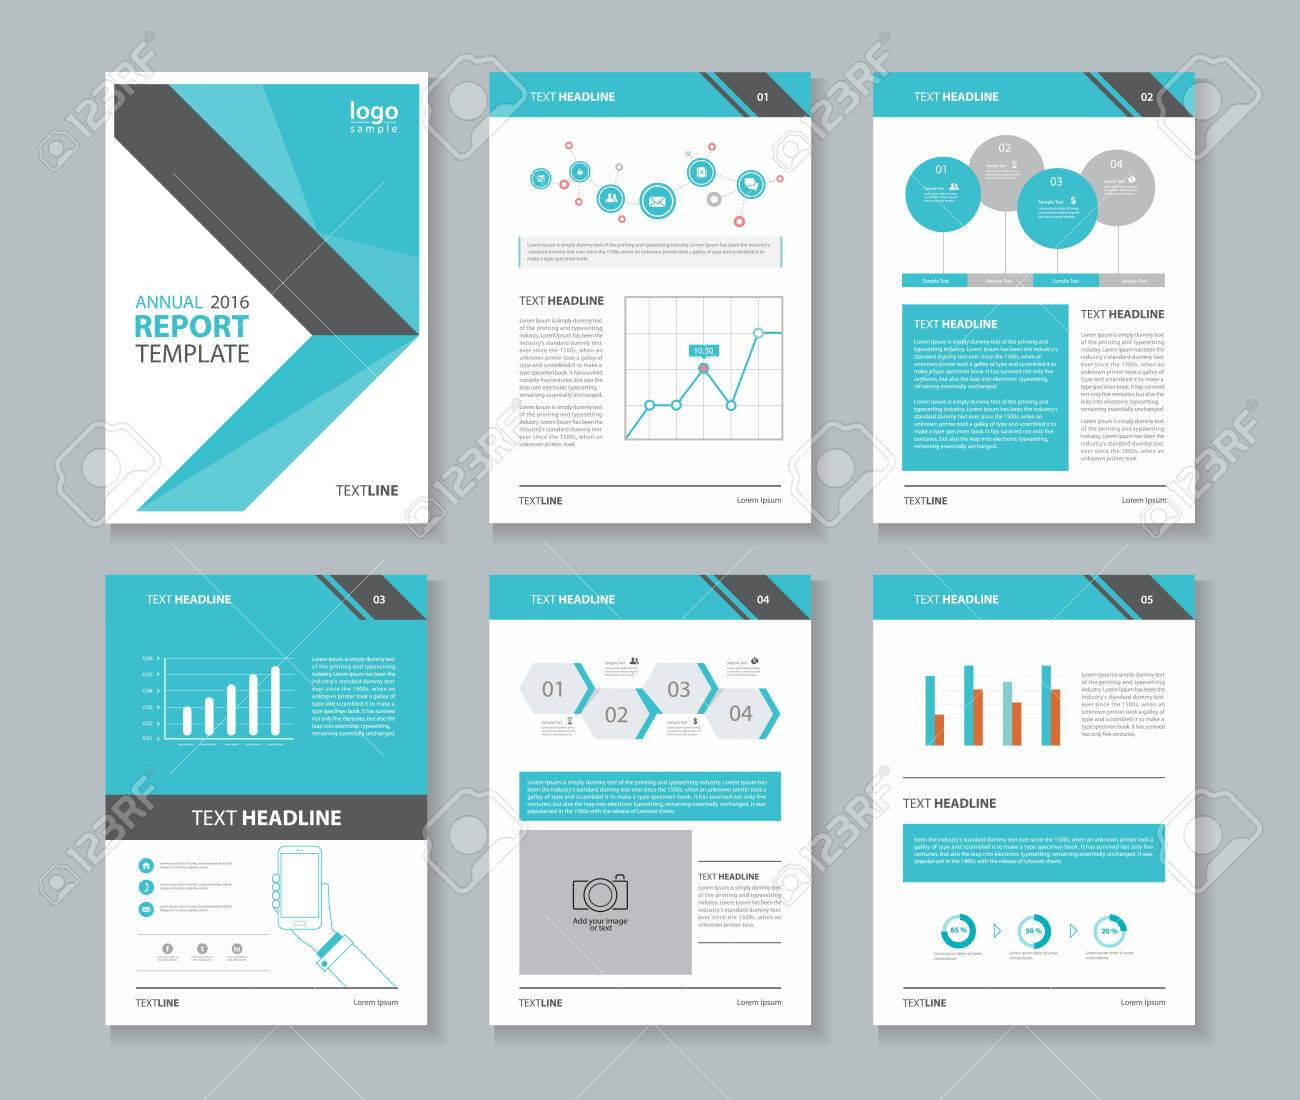 025 Free Annual Report Template Frightening Ideas Microsoft With Annual Report Template Word Free Download